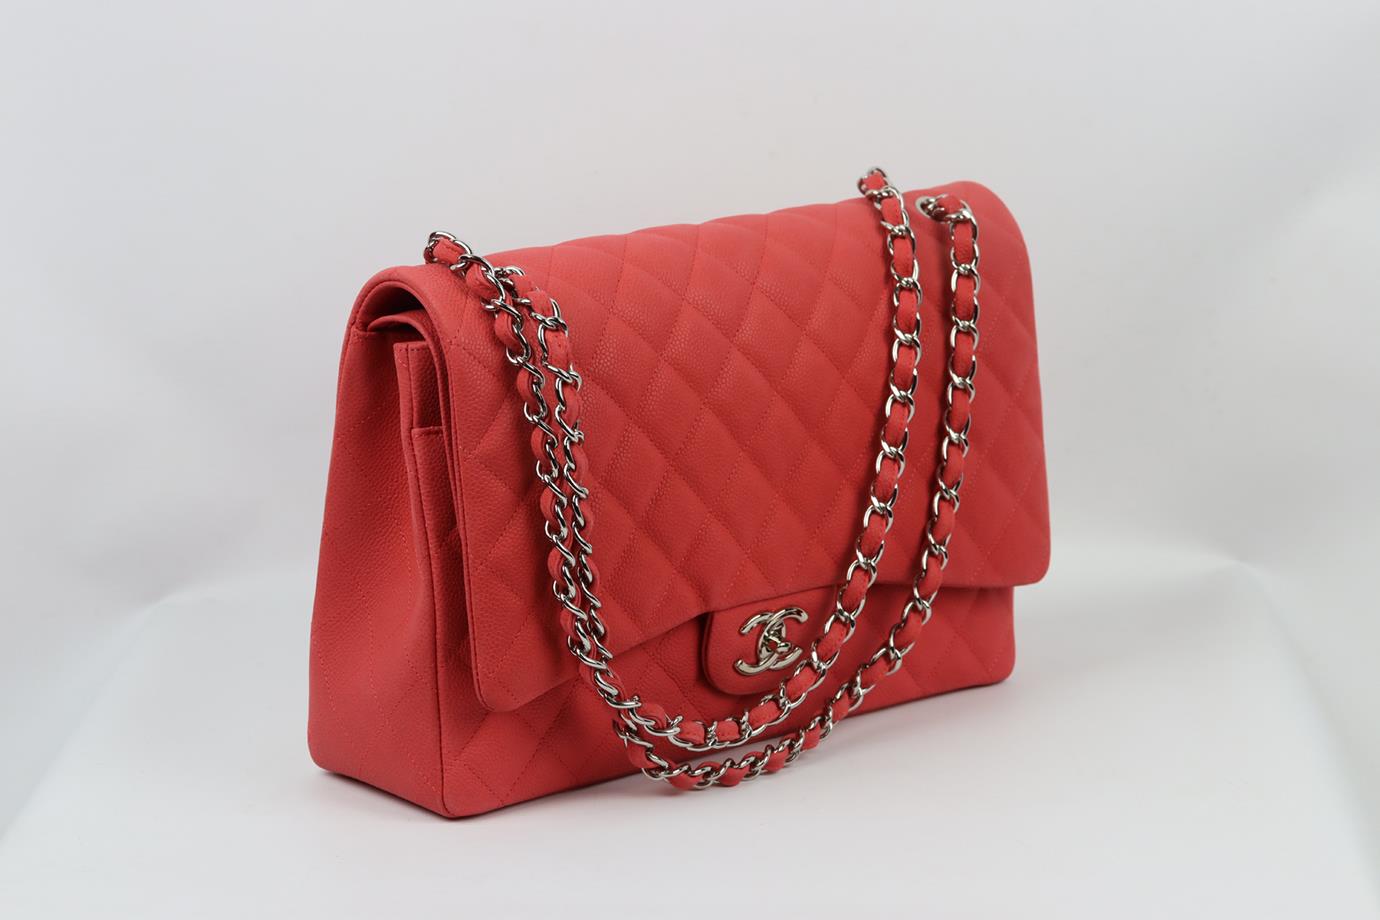 CHANEL 2014 MAXI CLASSIC QUILTED MATTE CAVIAR LEATHER DOUBLE FLAP SHOULDER BAG